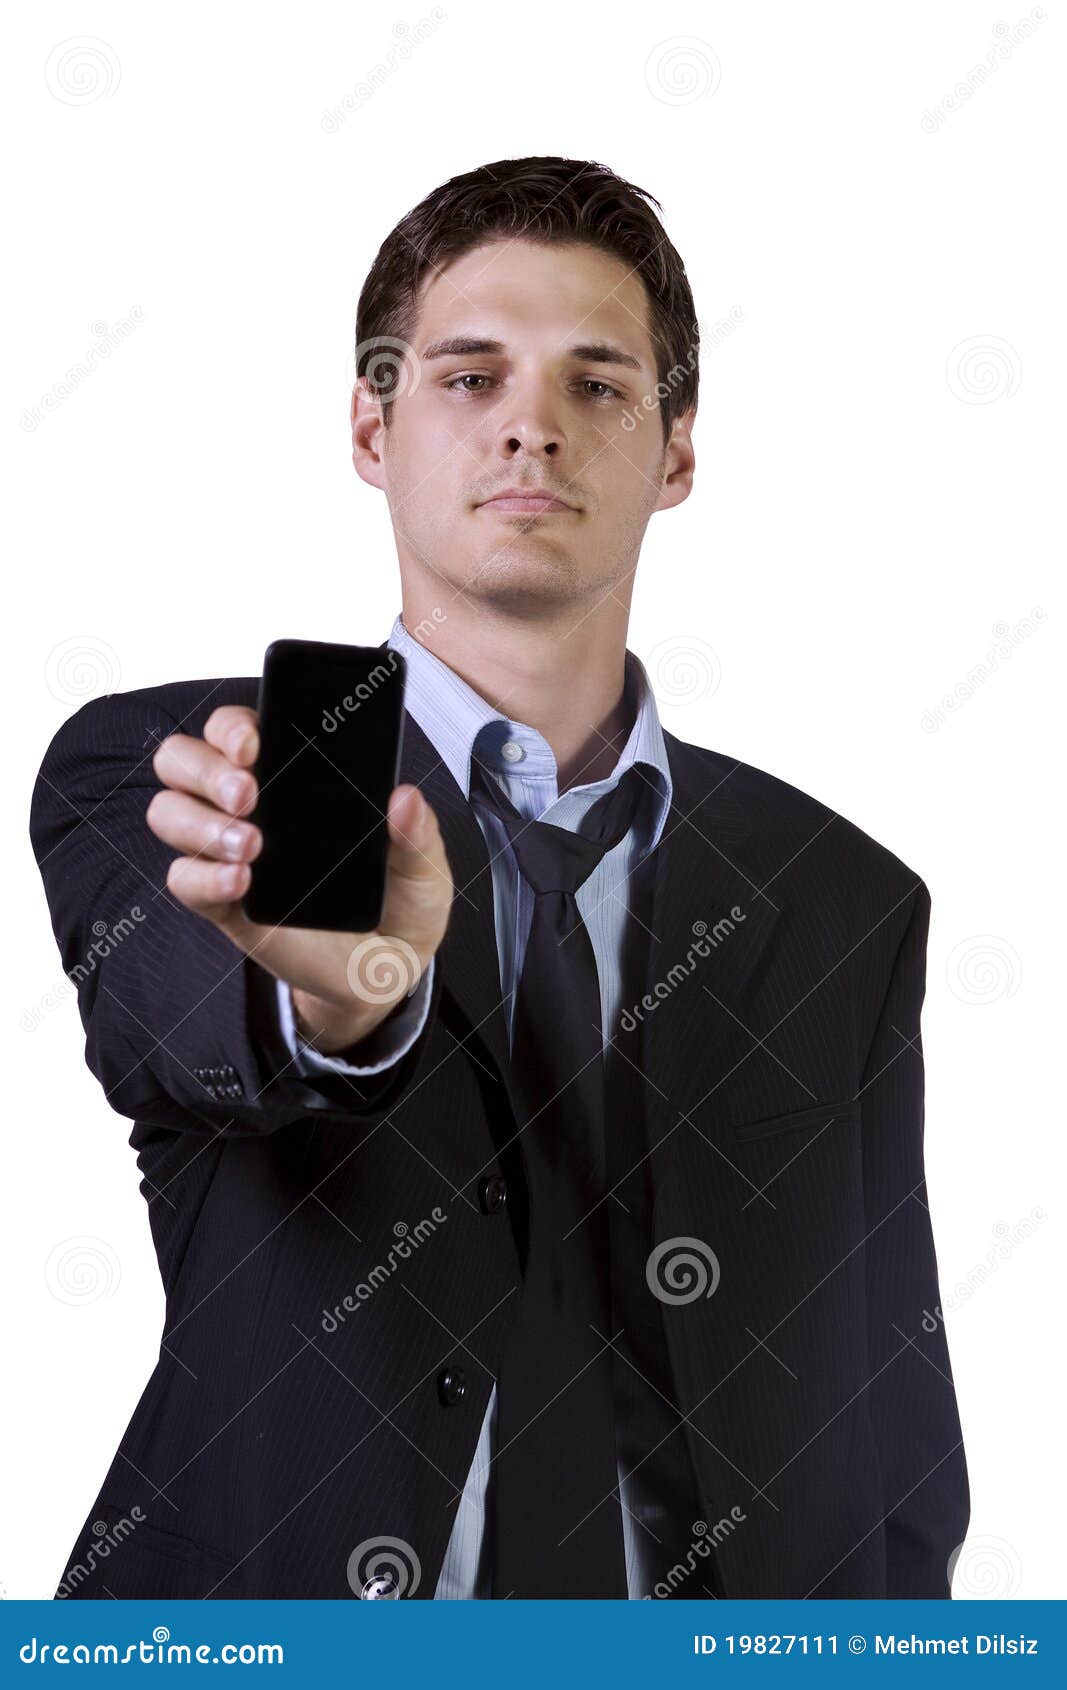 White Businessman Holding a Cell Phone Stock Image - Image of isolated ...